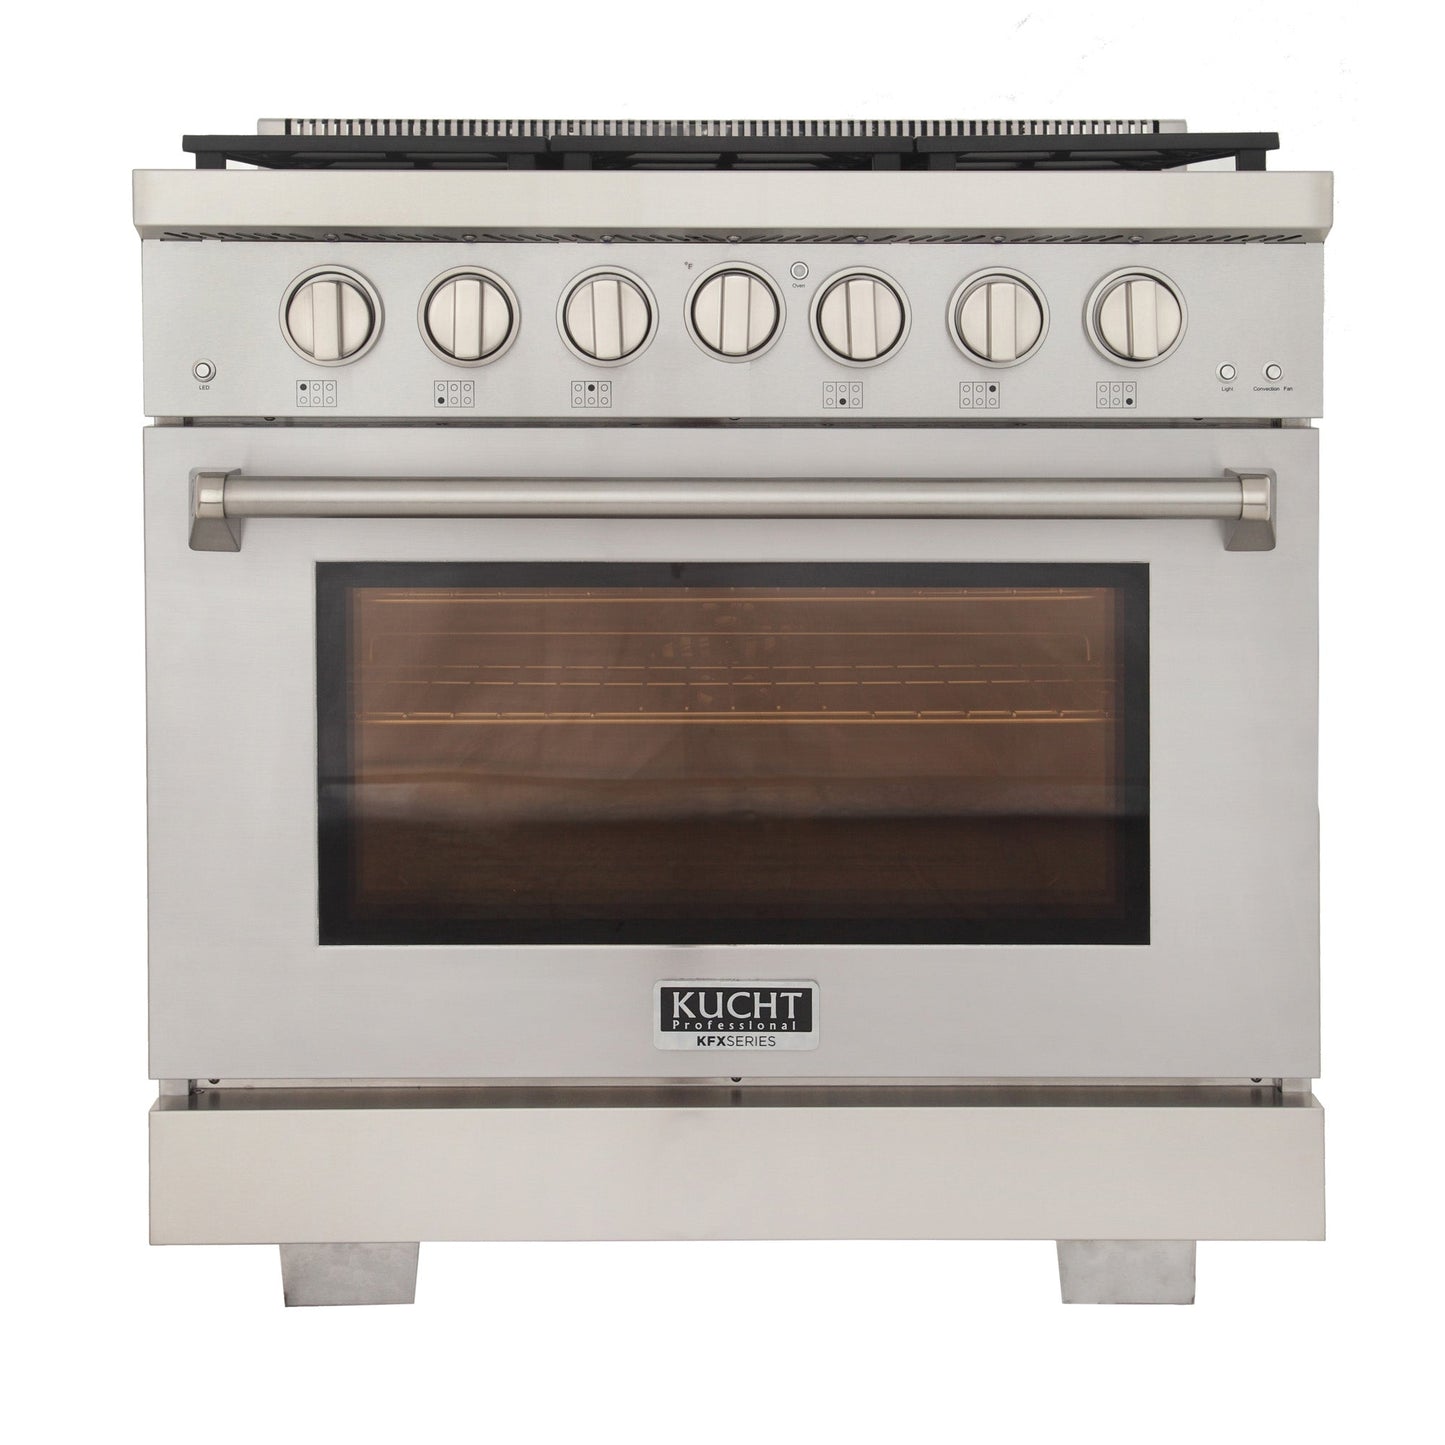 Kucht KFX Series 36" Freestanding Natural Gas Range With 6 Burners and Classic Silver Knobs